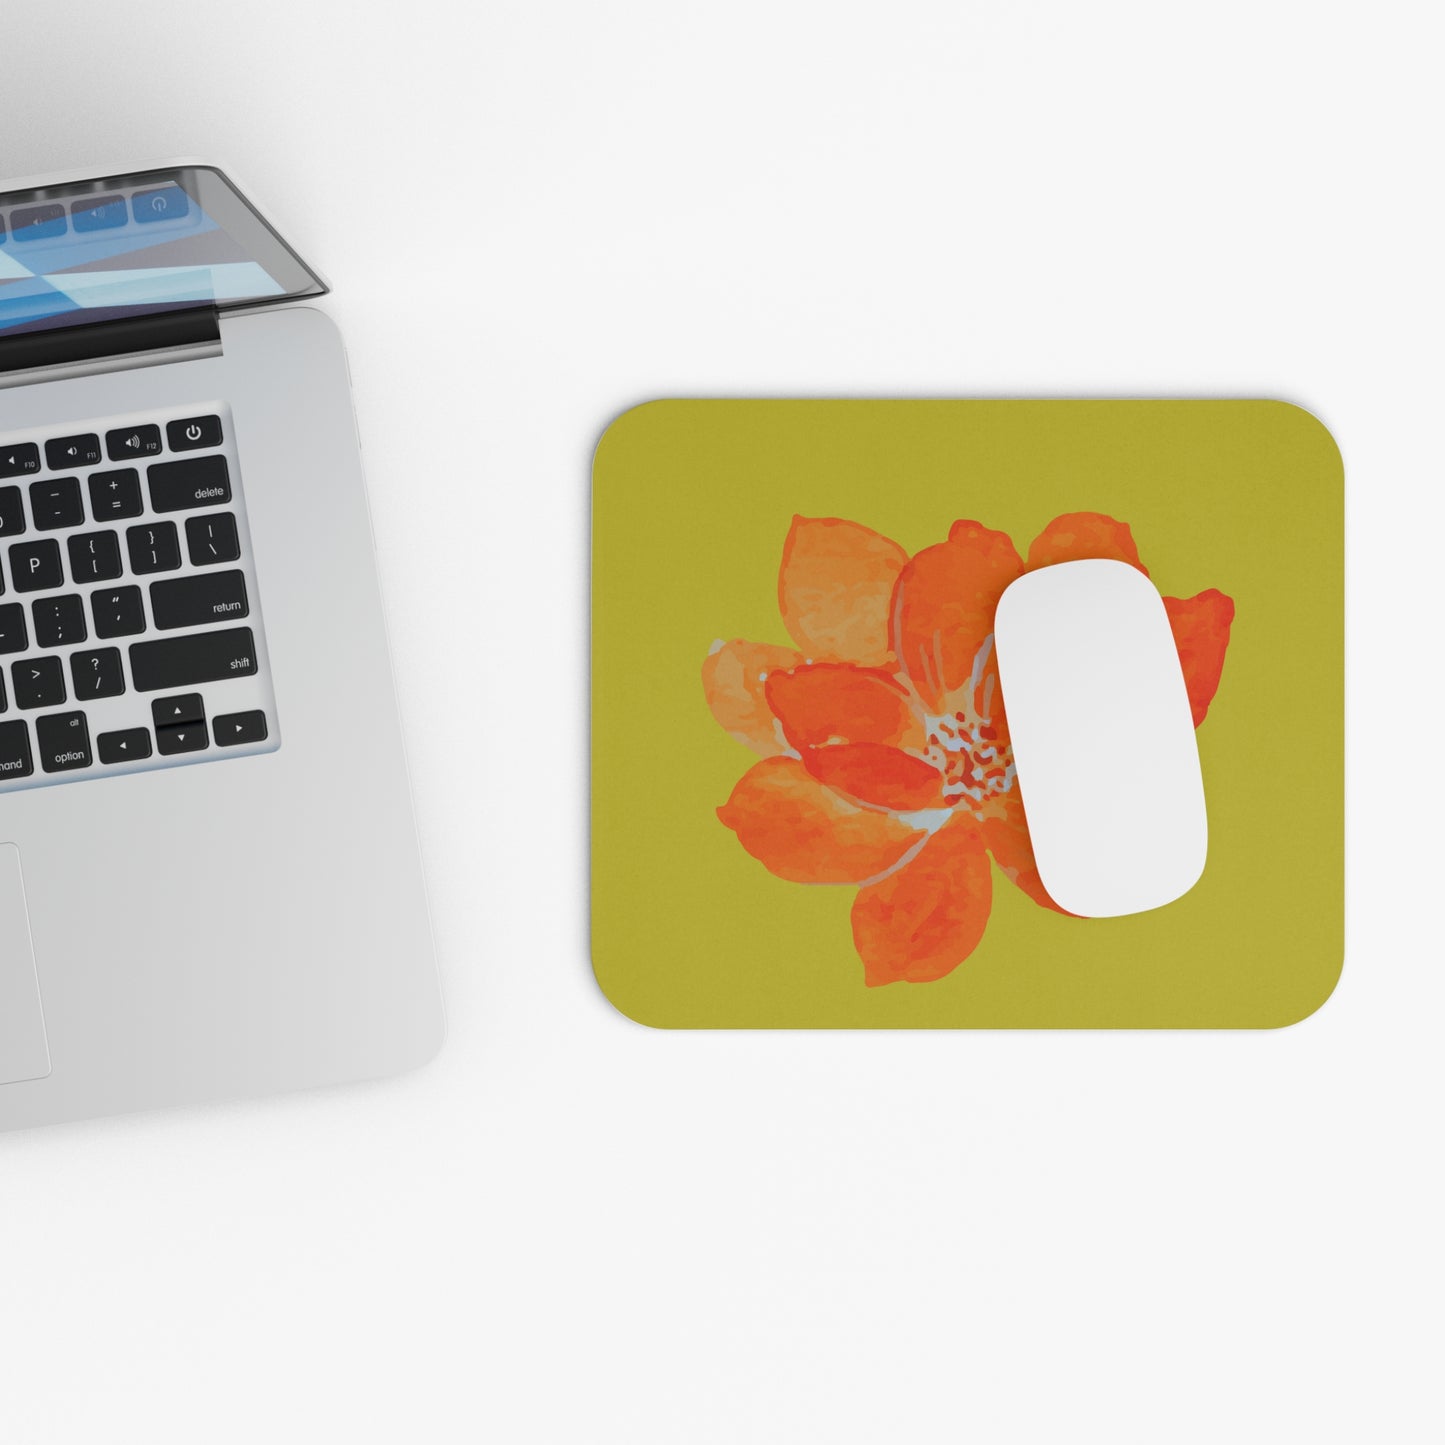 Orange Flower Mouse Pad, Yellow Mouse Pad, Flower Design Pad, Computer Mouse Pad, Laptop Mouse Pad (Rectangle)